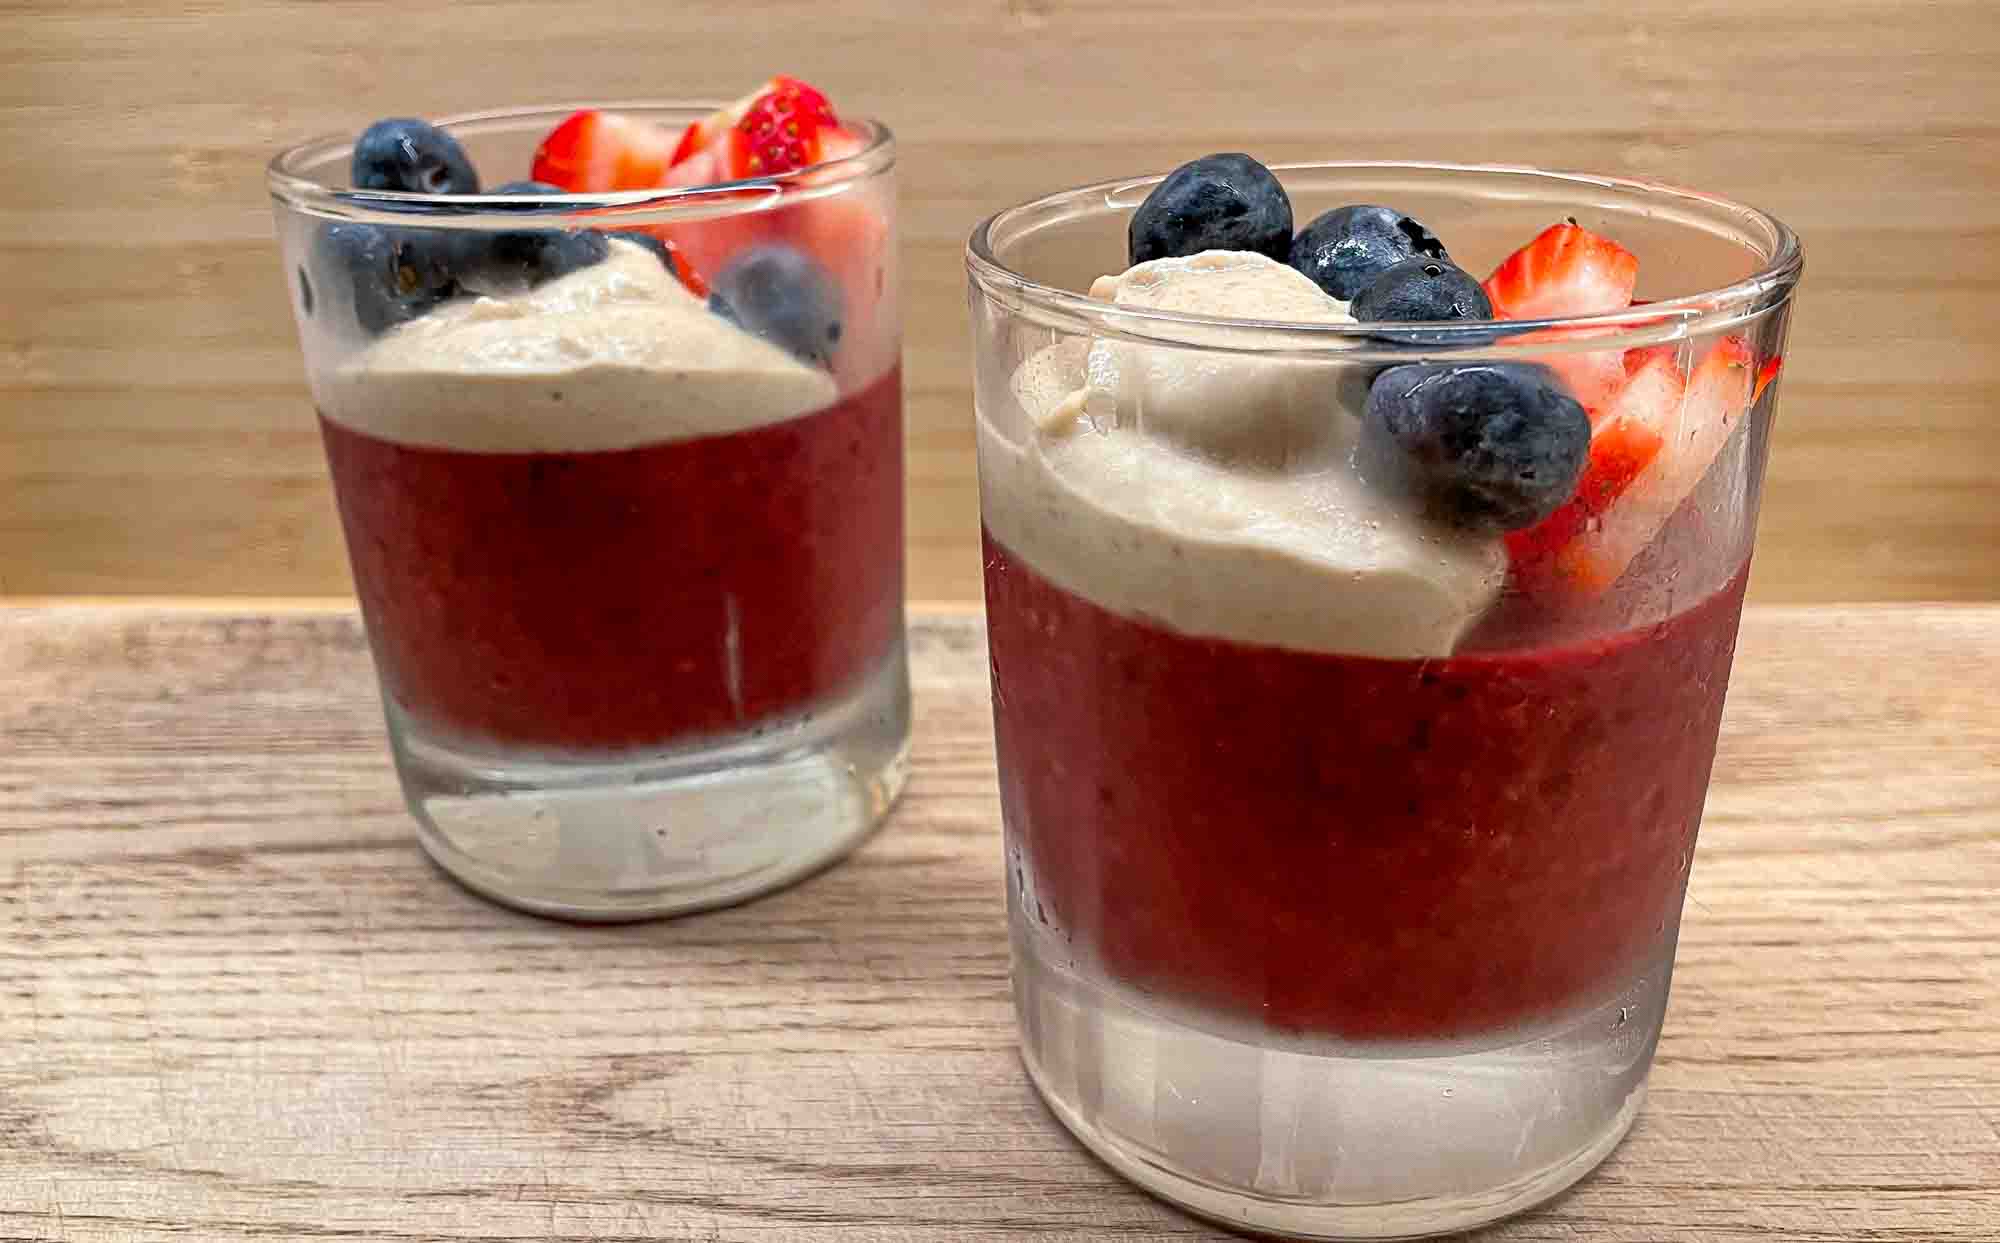 alt="an individual portion of berry pudding with some strawberry slices, blueberries, and a dollop of rich cashew cream on top."